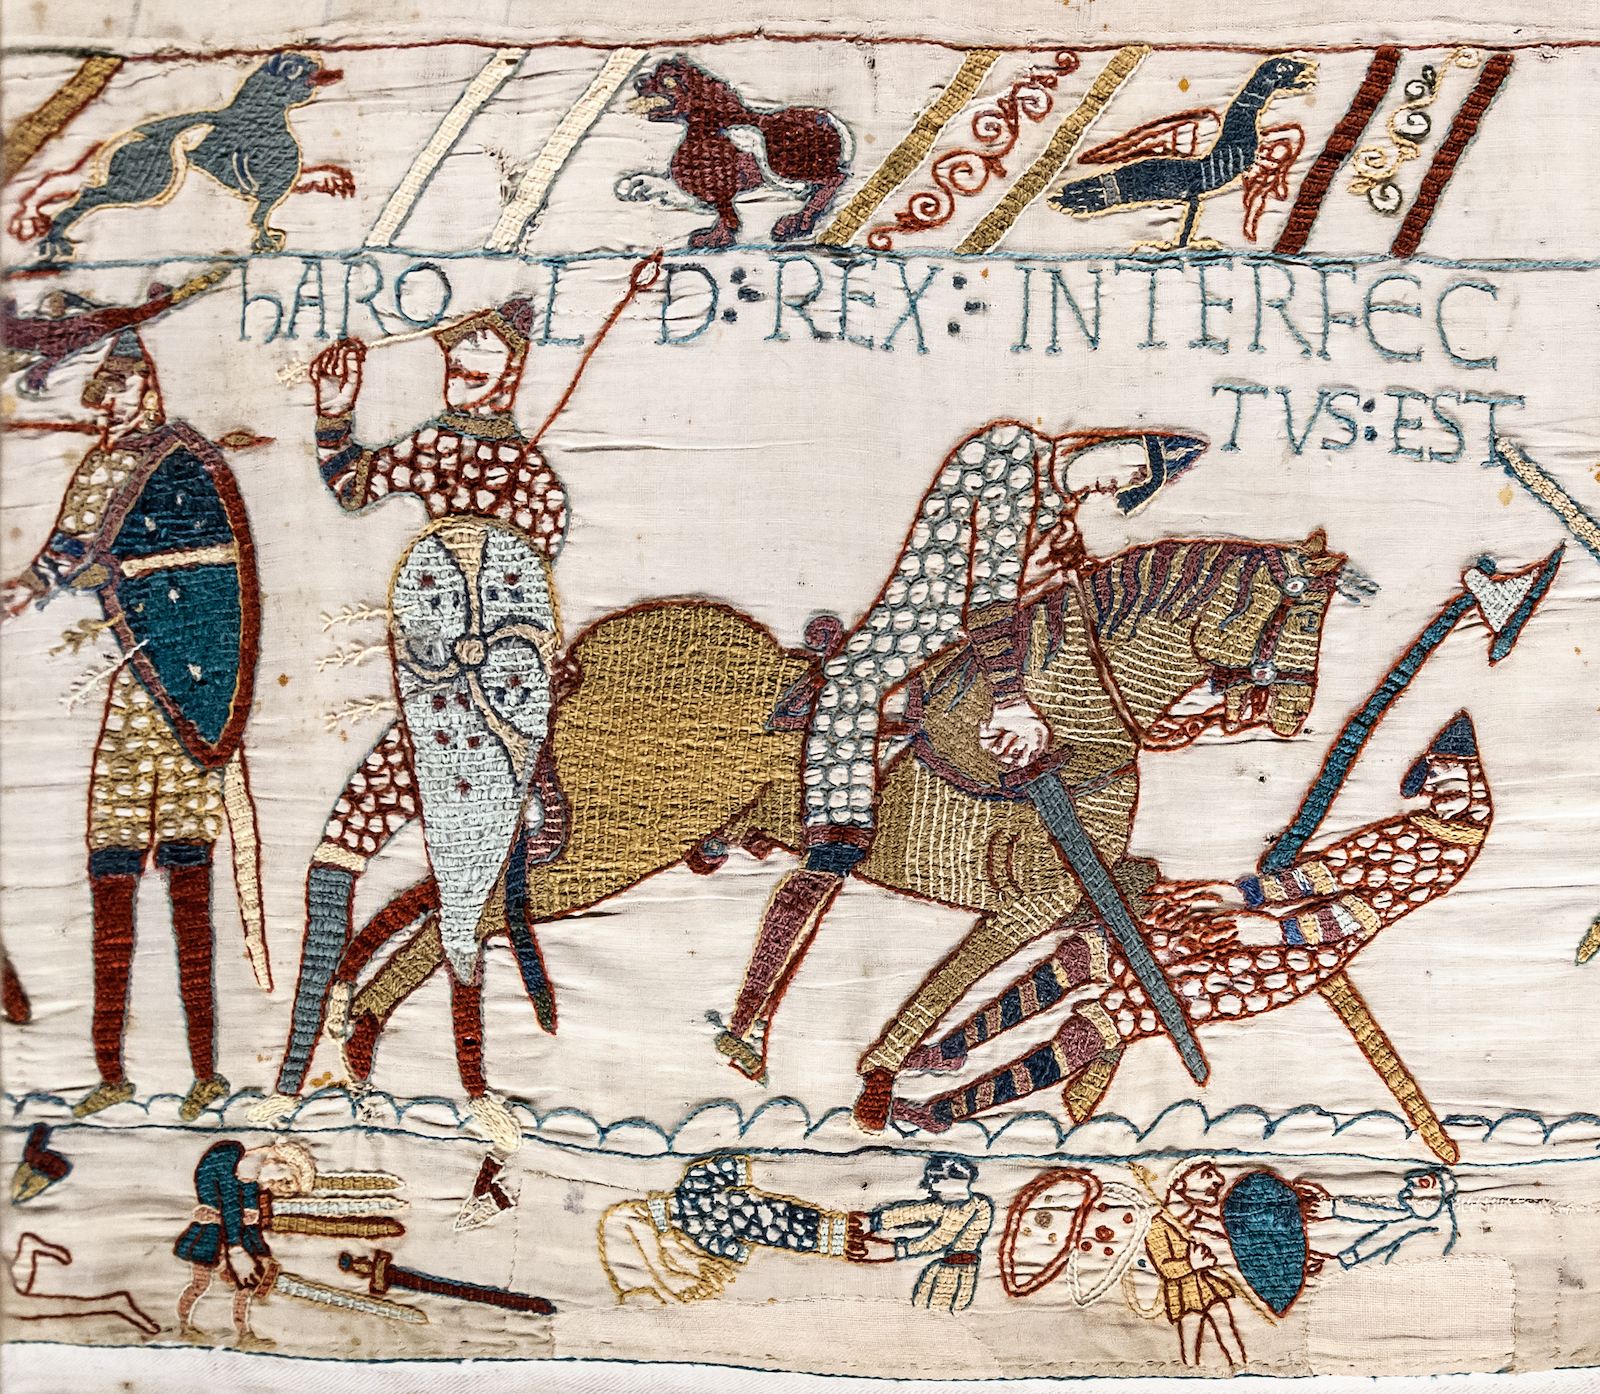 A scene from the Bayeux Tapestry, popularly believed to show the death of King Harold II of England. Myrabella. Public Domain.